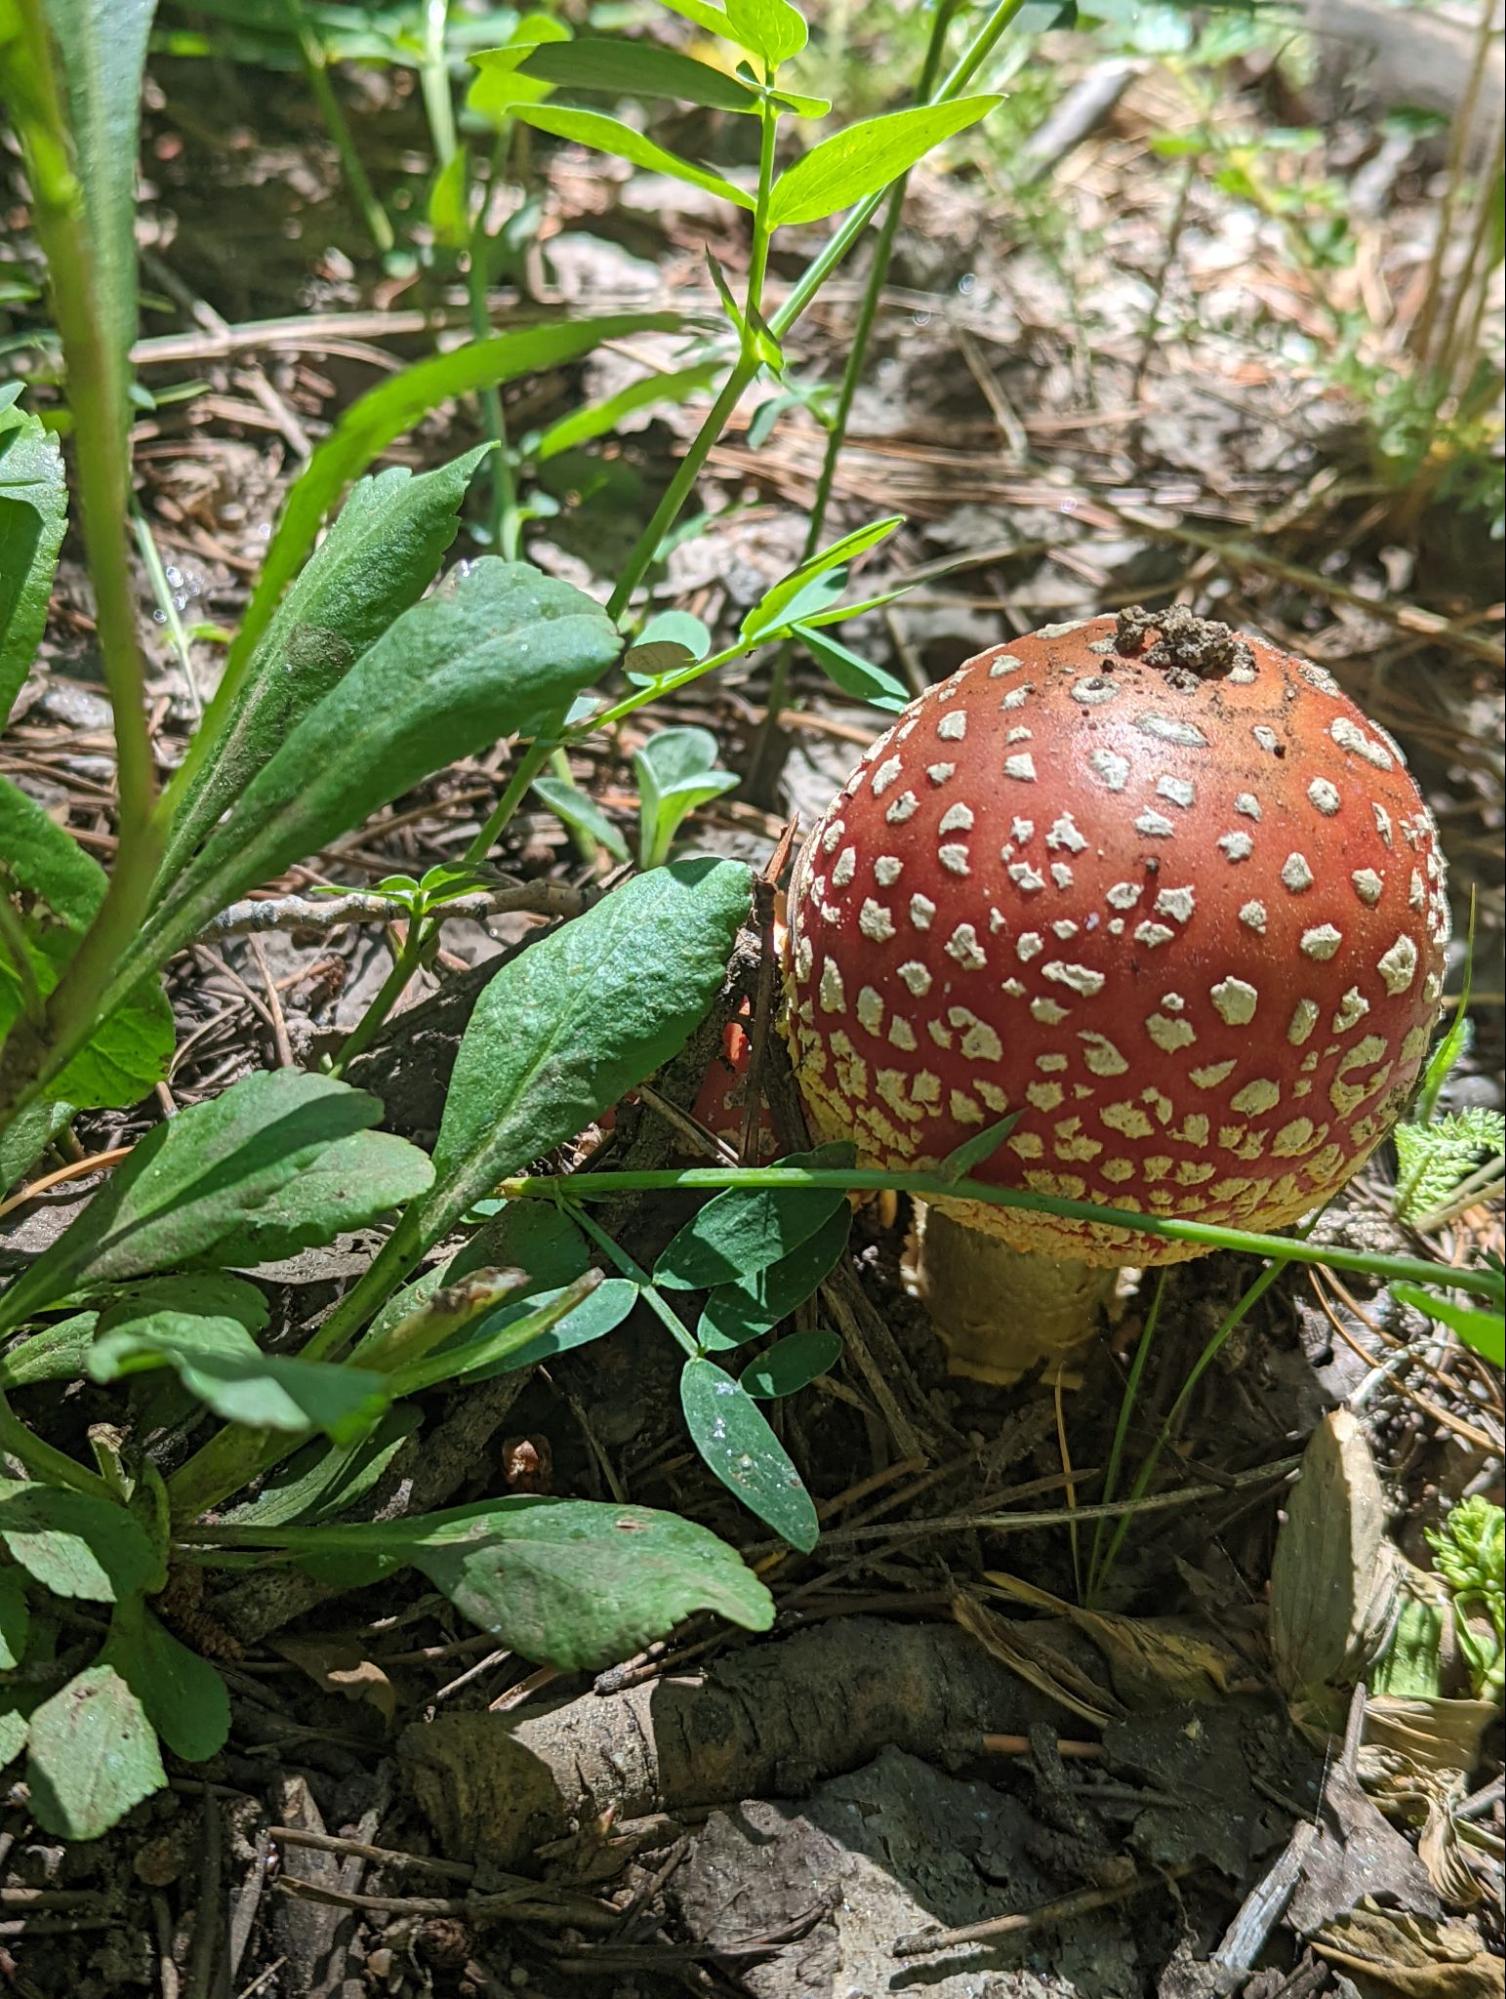 a red and white mushroom sitting on the ground